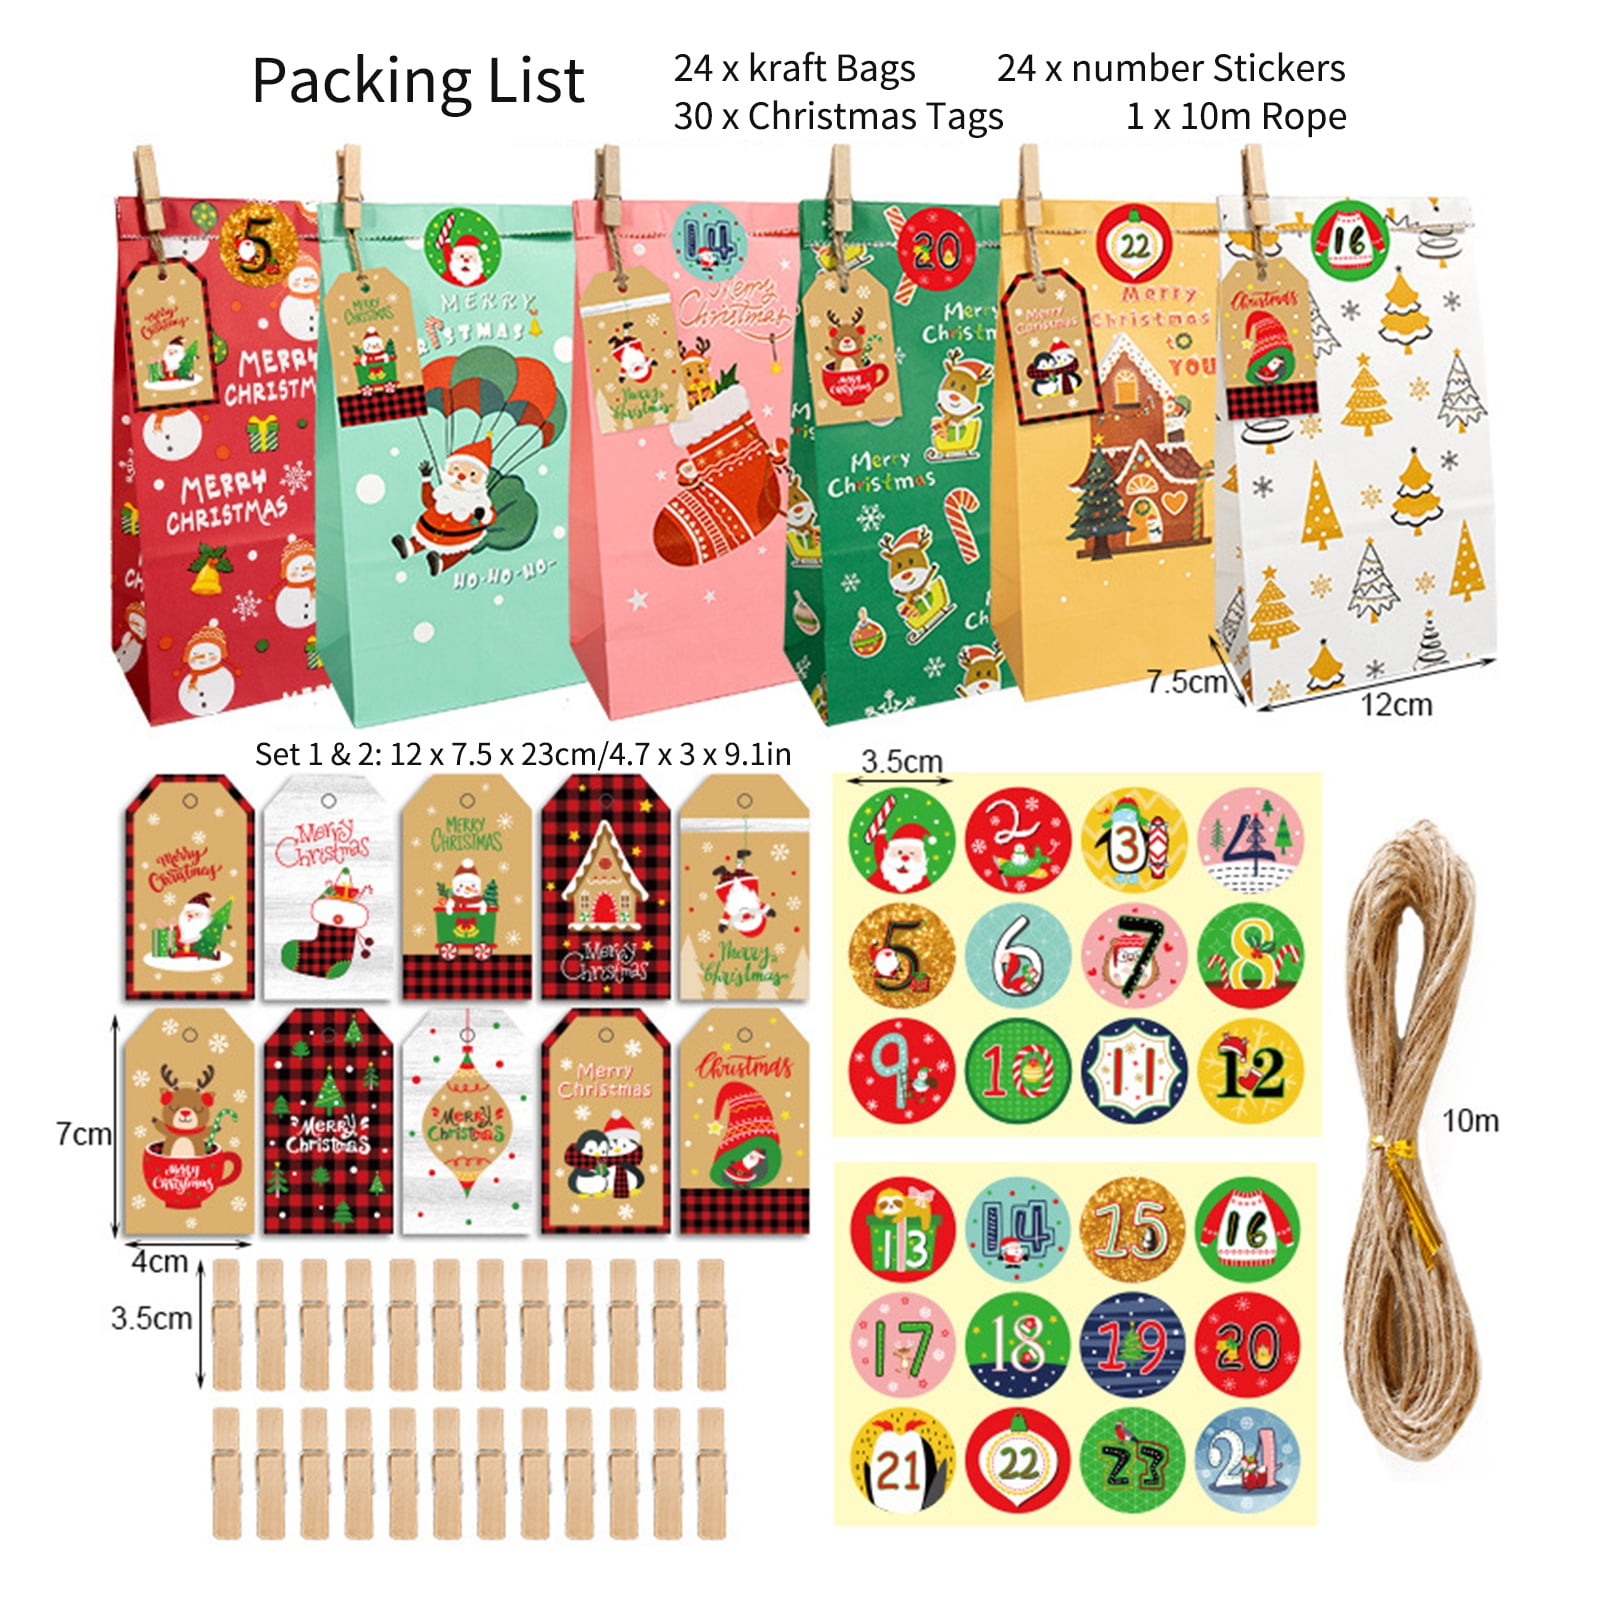 24x 4cm Round Kraft Paper Handmade Stickers Made With Love Kitchen Product Label